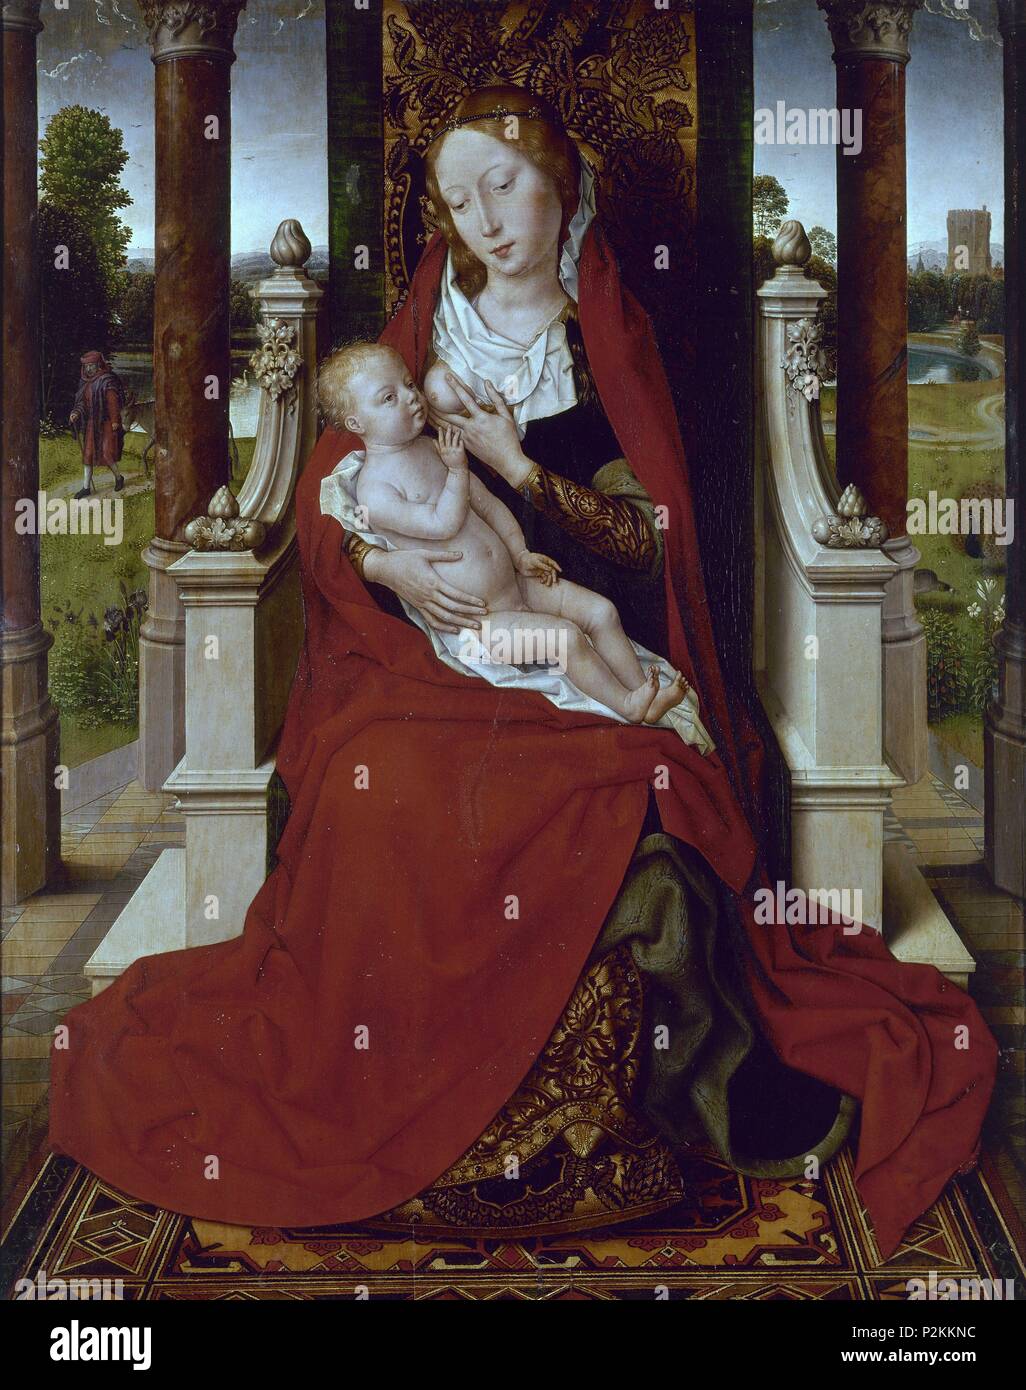 'The Virgin and Child on a Throne', 1492-1494, Oil on panel, 77,6 x 61,1 cm. Author: Hans Memling (c. 1433-1494). Location: CATEDRAL-CAPILLA REAL-INTERIOR, GRANADA, SPAIN. Also known as: VIRGEN DE LA SILLA. Stock Photo